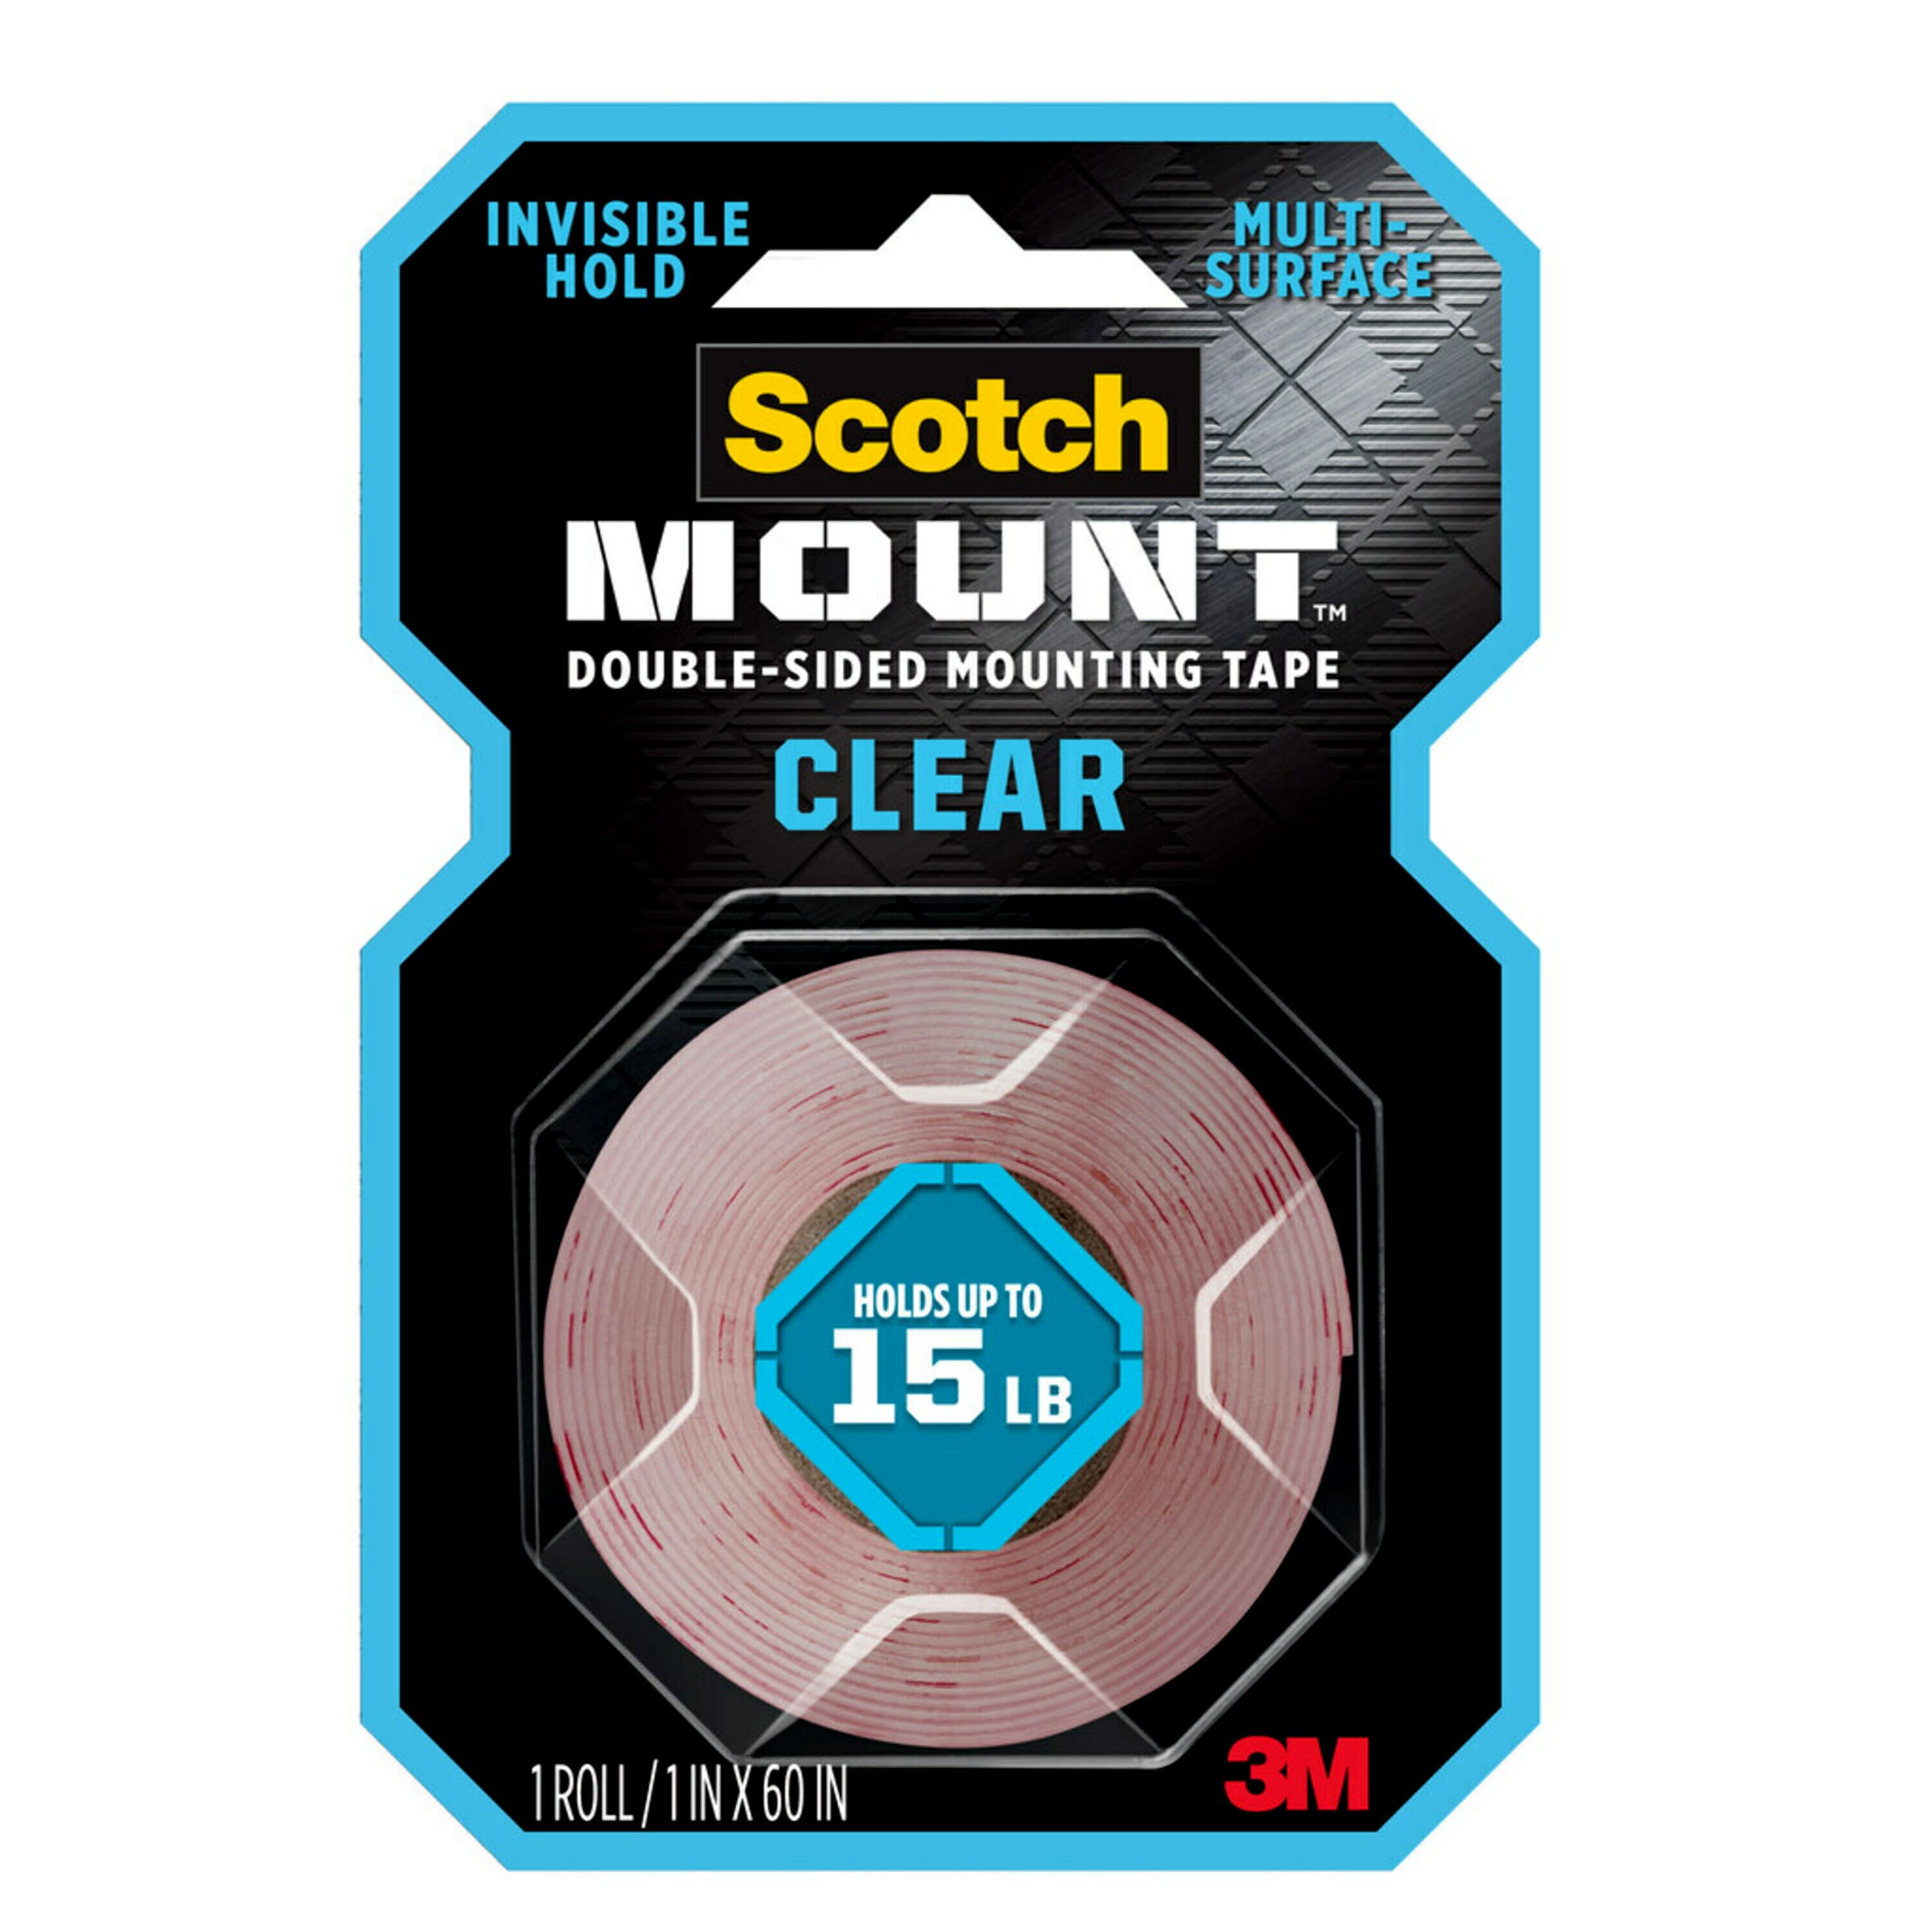 Scotch-Mount™ Extreme Double-Sided Mounting Tape, 2.5 cm x 1.52 m